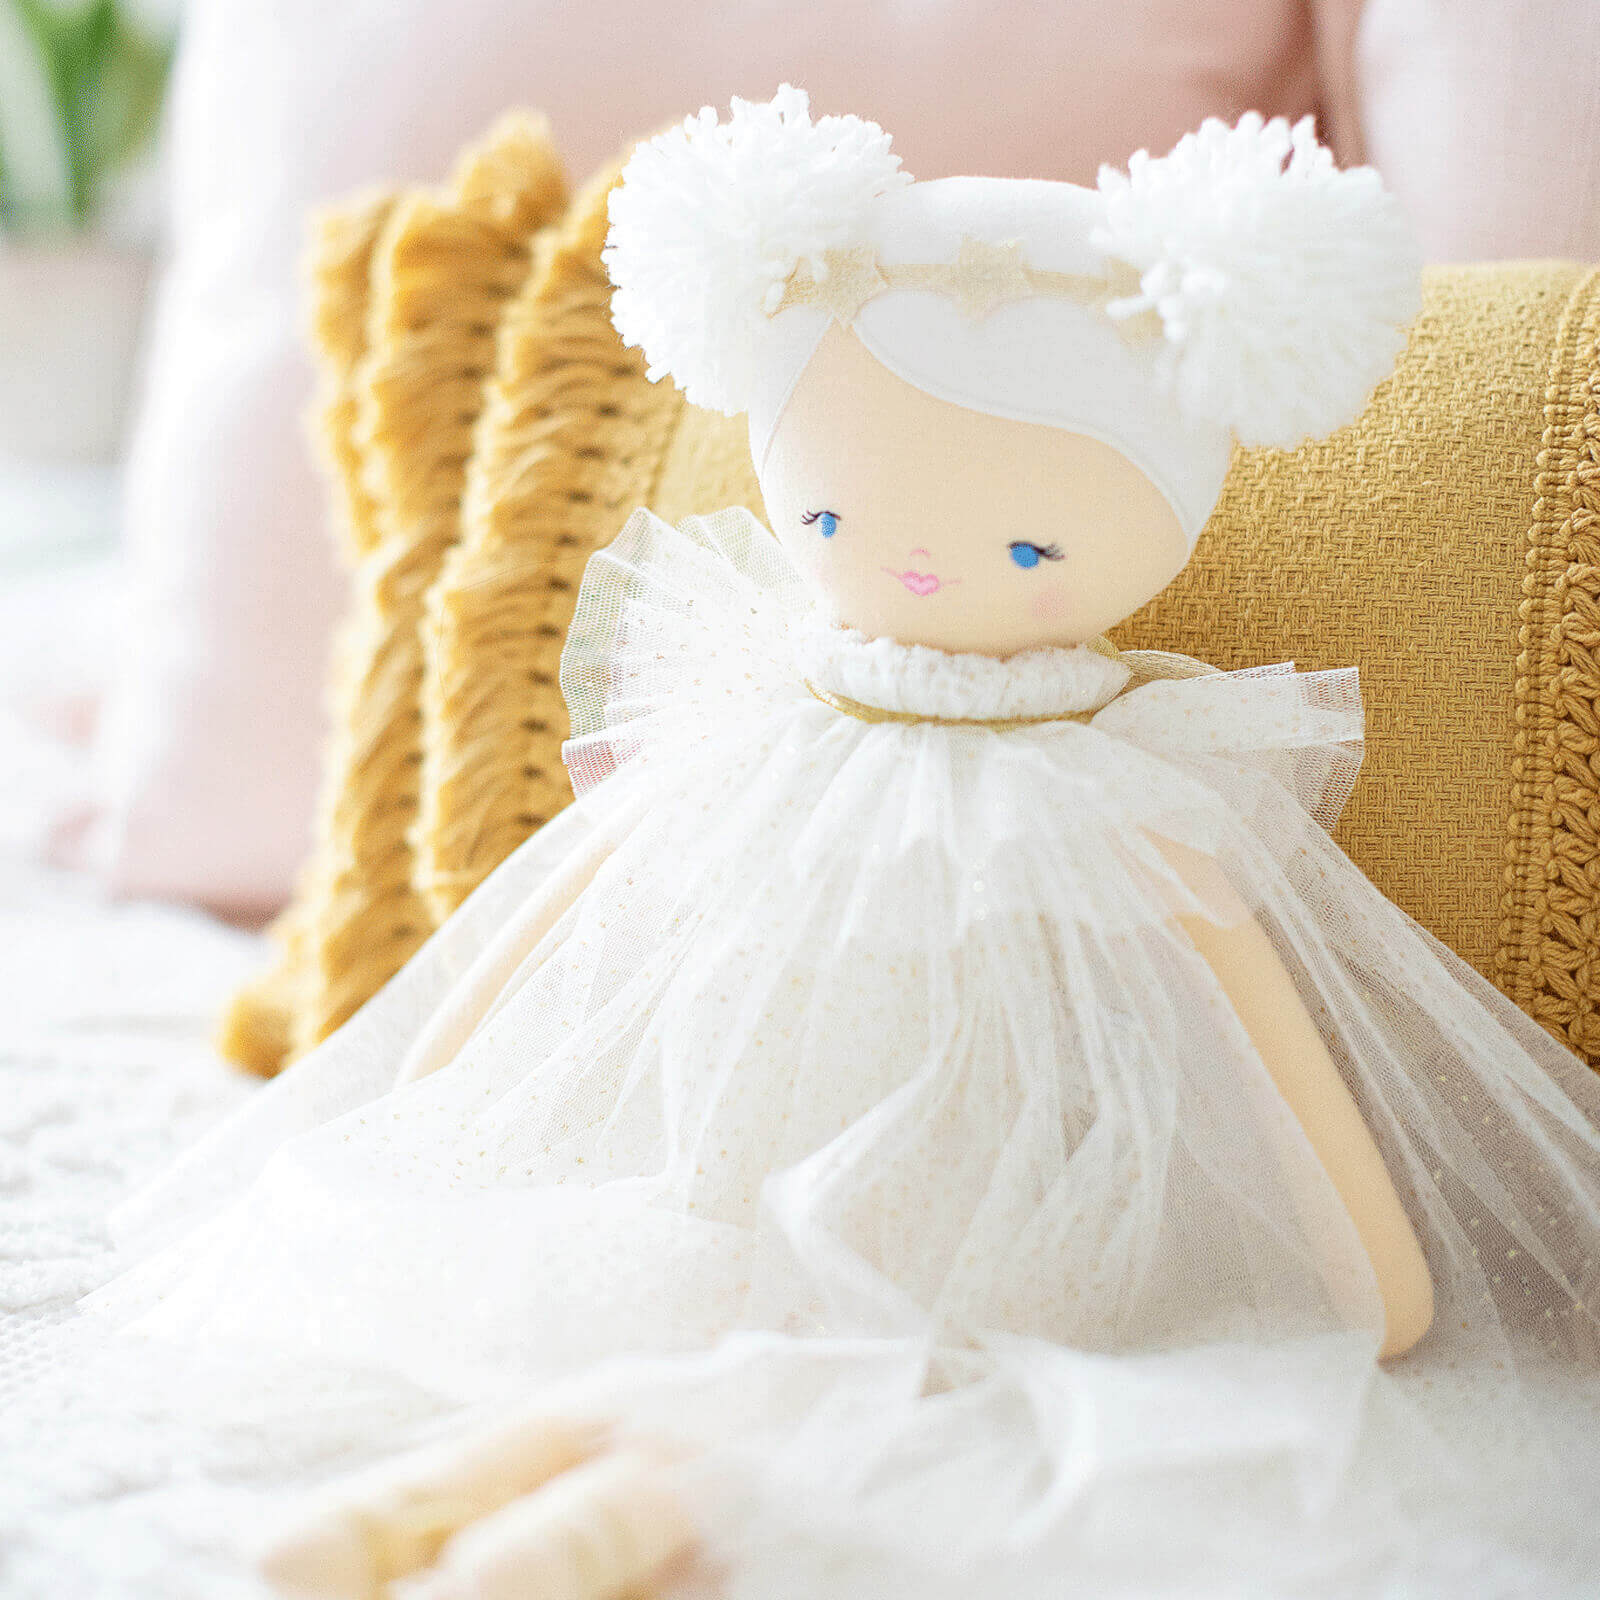 Doll wearing a white dress and white wool hair leaning against a yellow cushion